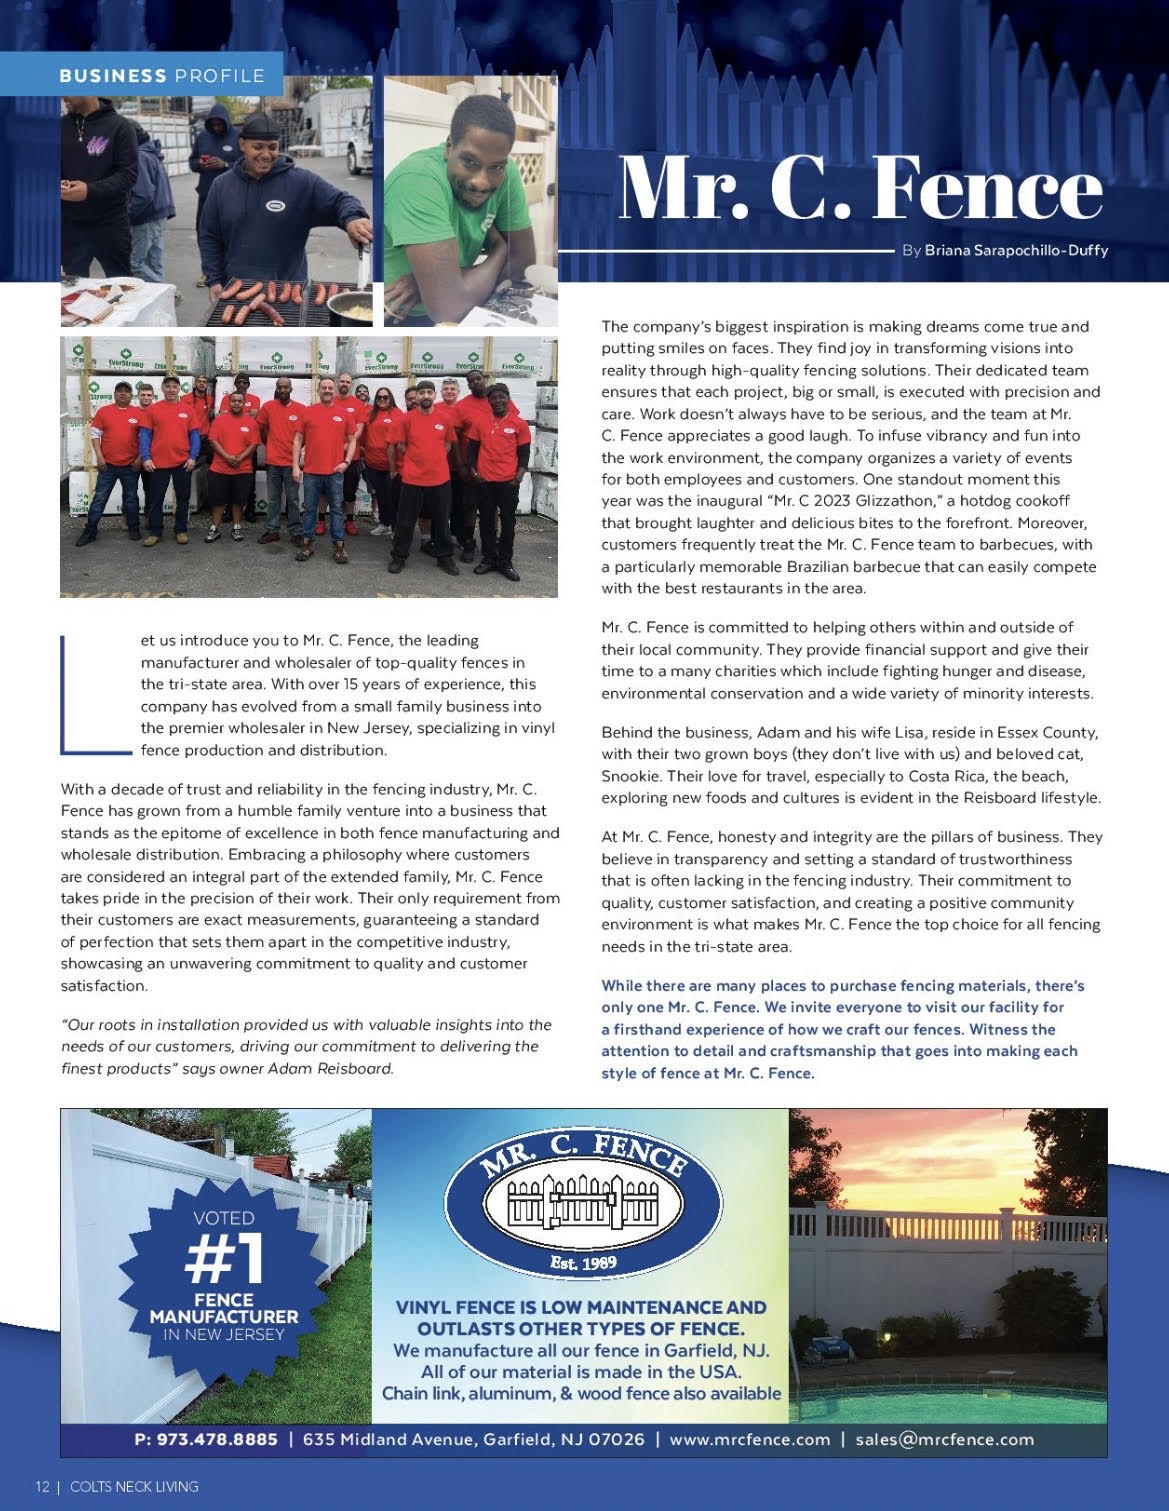 Here is our latest Business Profile from Mr. C Fence!